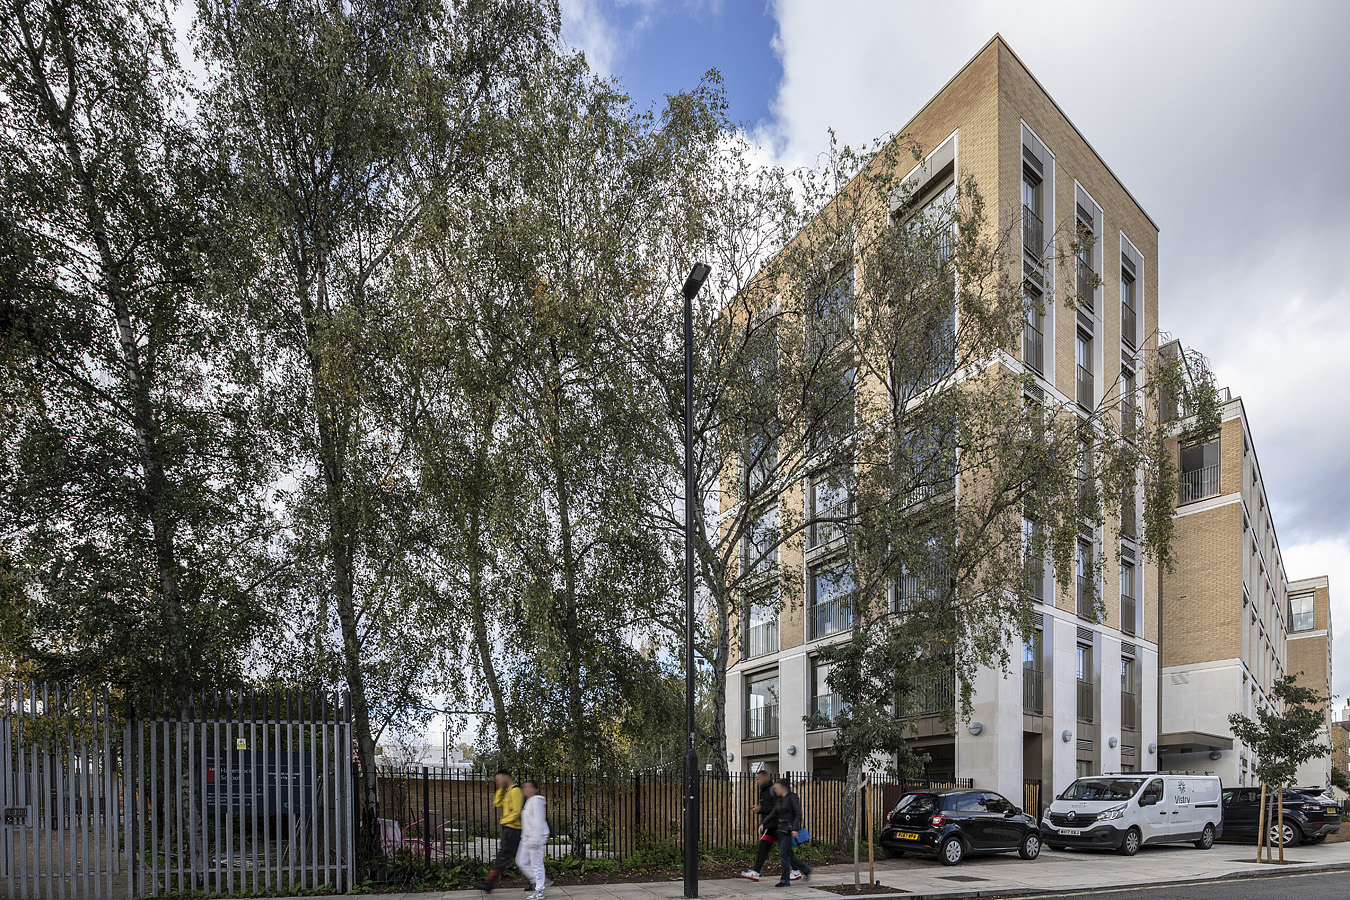 intergenerational, extra care, development, Charlie Ratchford, Client advisor, Camden Council, Residential Architecture, Residential, WWA Studios, WWA, West Waddy Archadia, West Waddy, Archadia, Architecture, Urban Design, Town Planning